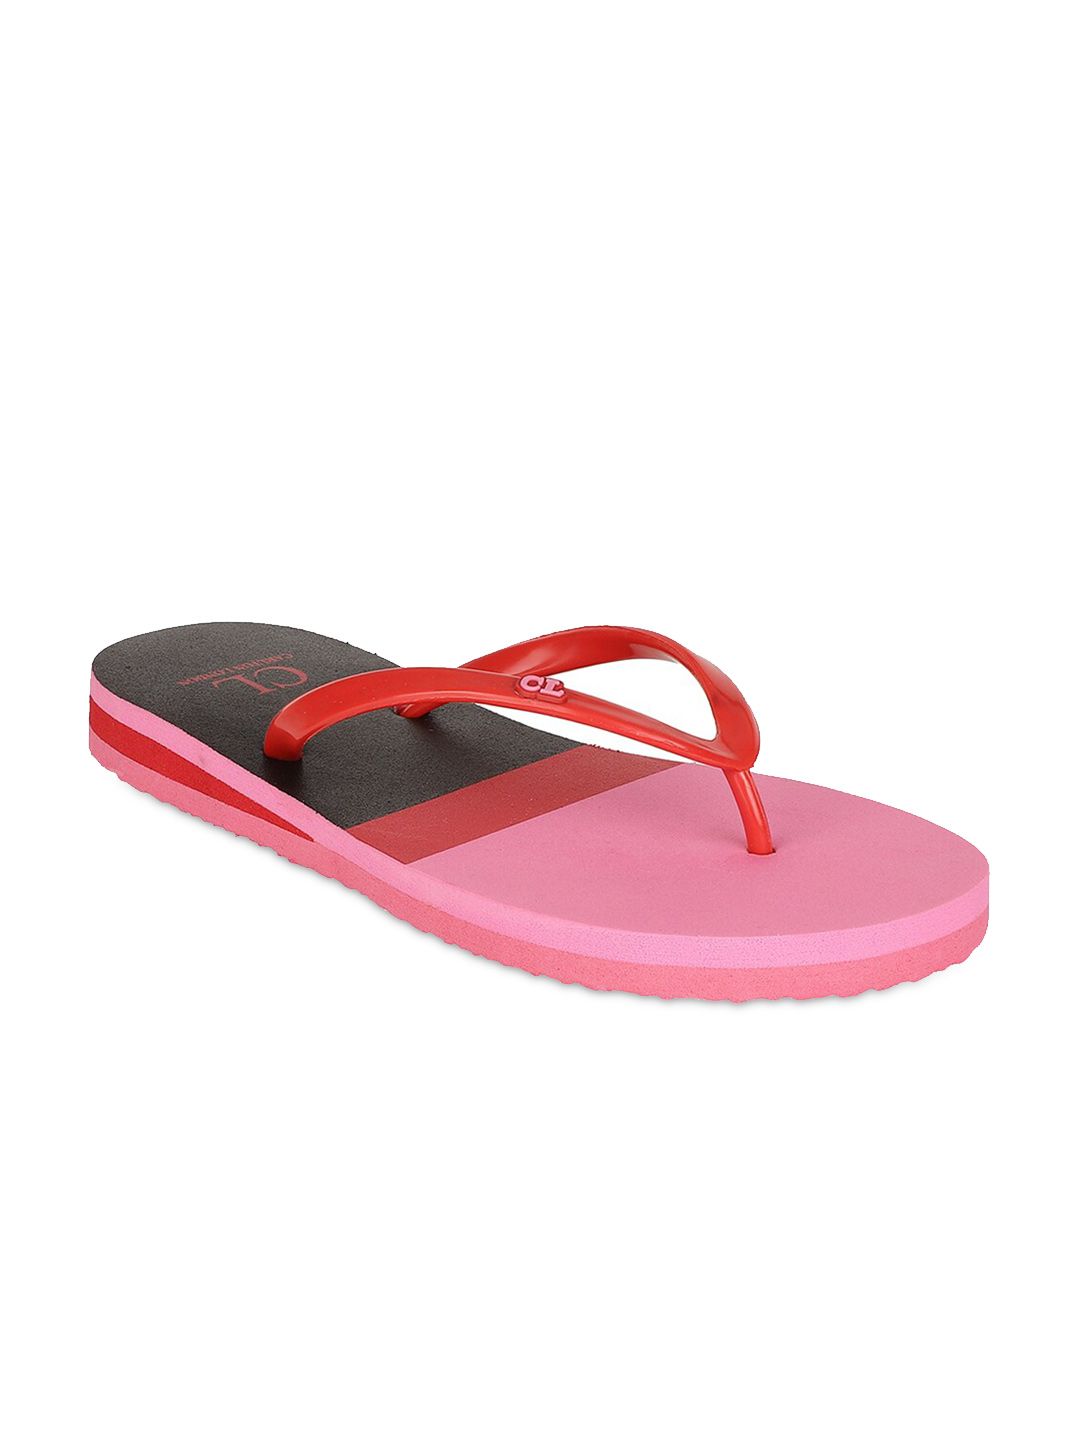 Carlton London Women Pink & Red Colourblocked Room Slippers Price in India